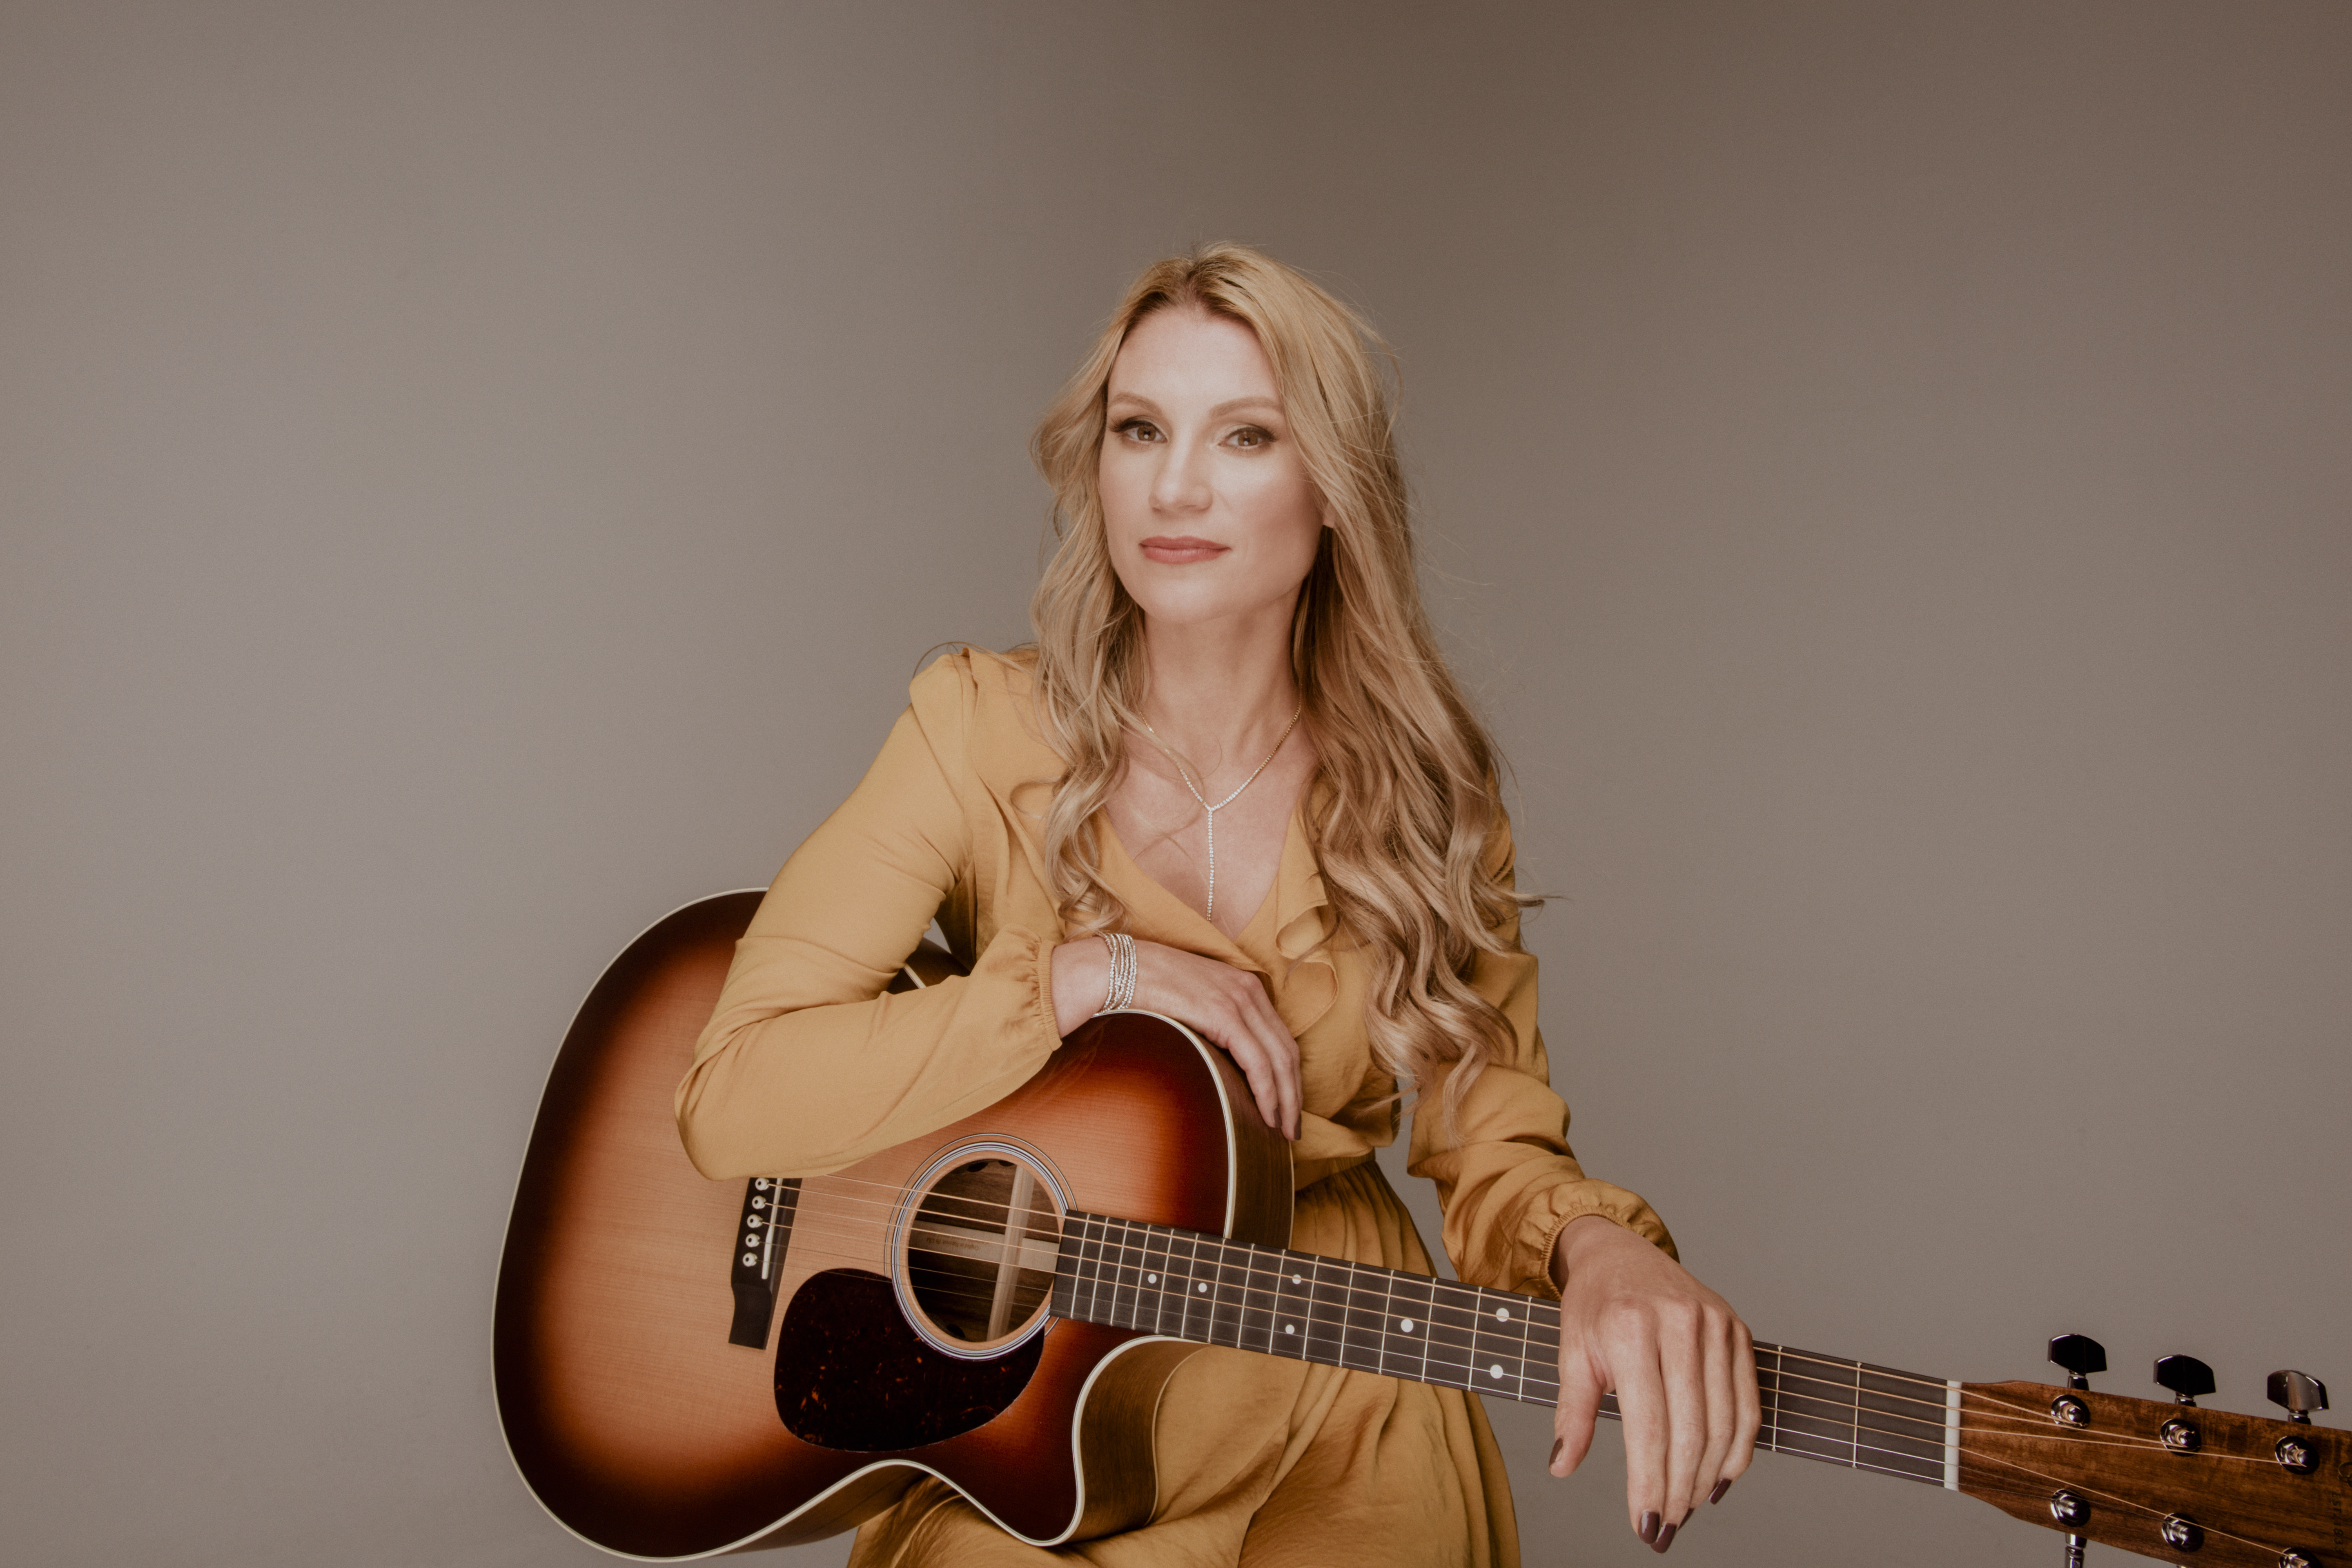 Get to Know Military Vet Turned Country Singer Jenny Leigh Miller with Debut Song “Driving With the Top Down”